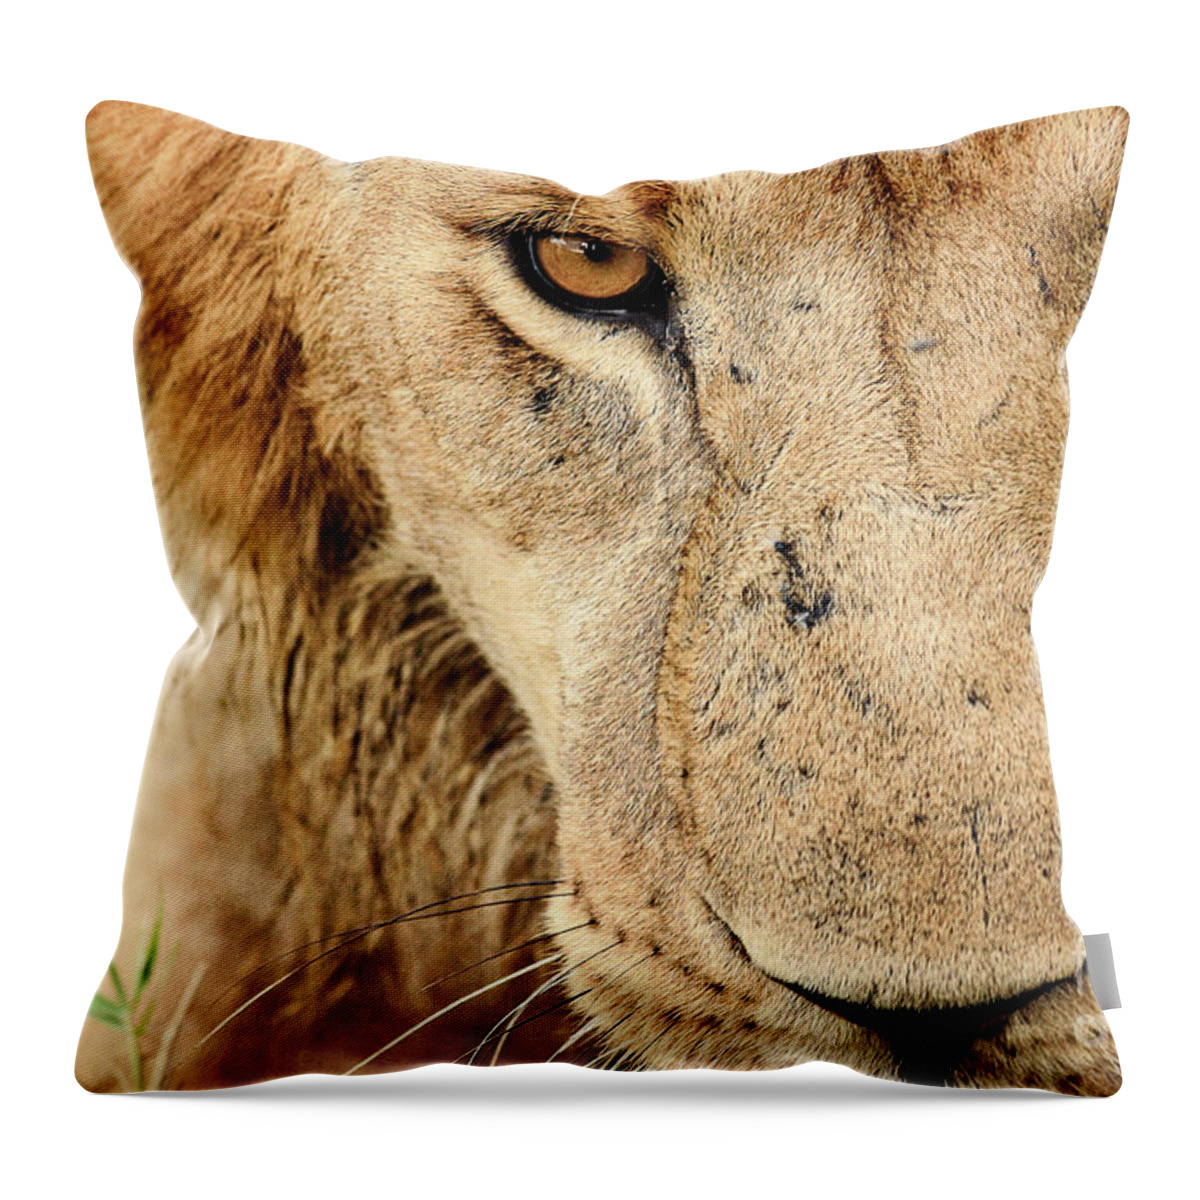 Lion Throw Pillow featuring the photograph Royalty by Kathy Strauss